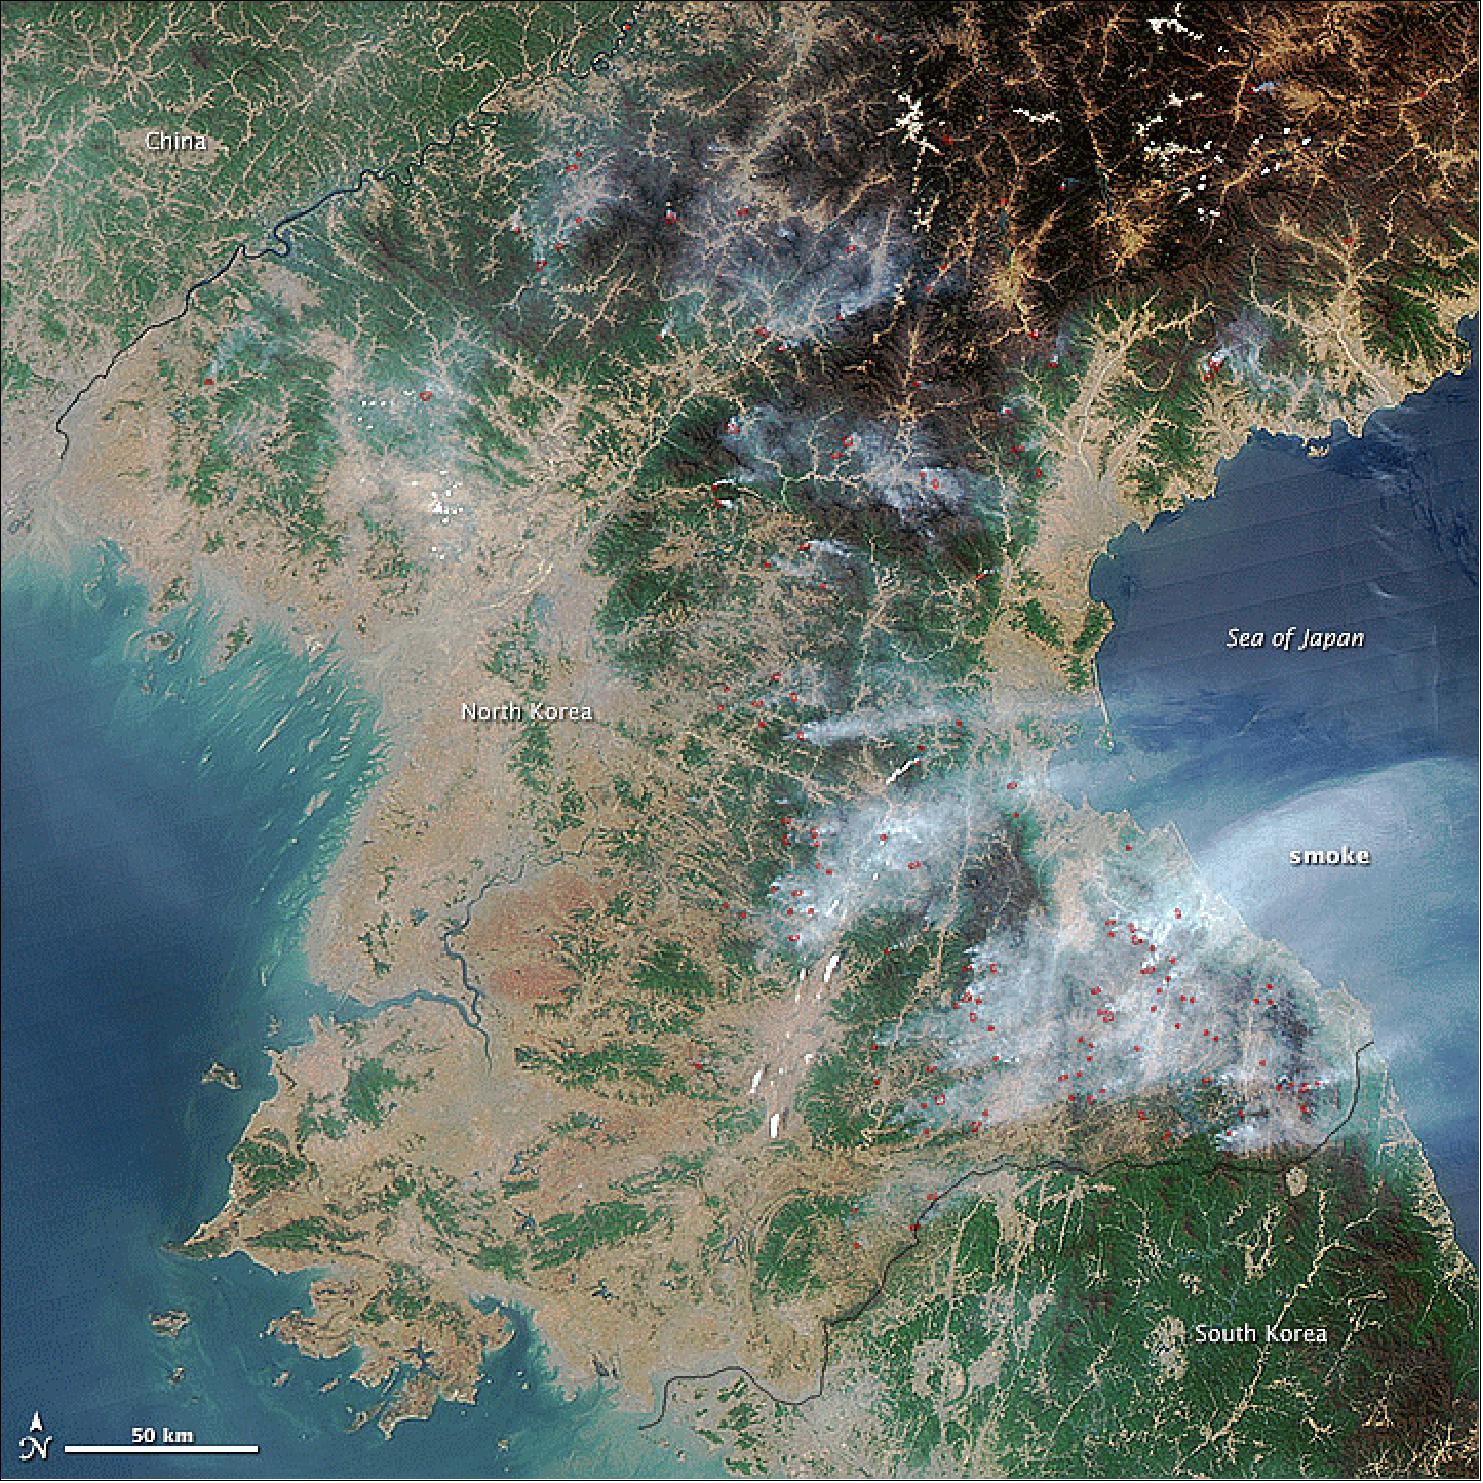 Figure 129: Actively burning areas, as viewed by NASA’s Aqua satellite on April 25, 2014, are outlined in red. Fields and grasslands appear light brown. Forests at lower elevations appear green; at higher elevations, forests are still brown at this time of year (image credit: NASA Earth Observatory)